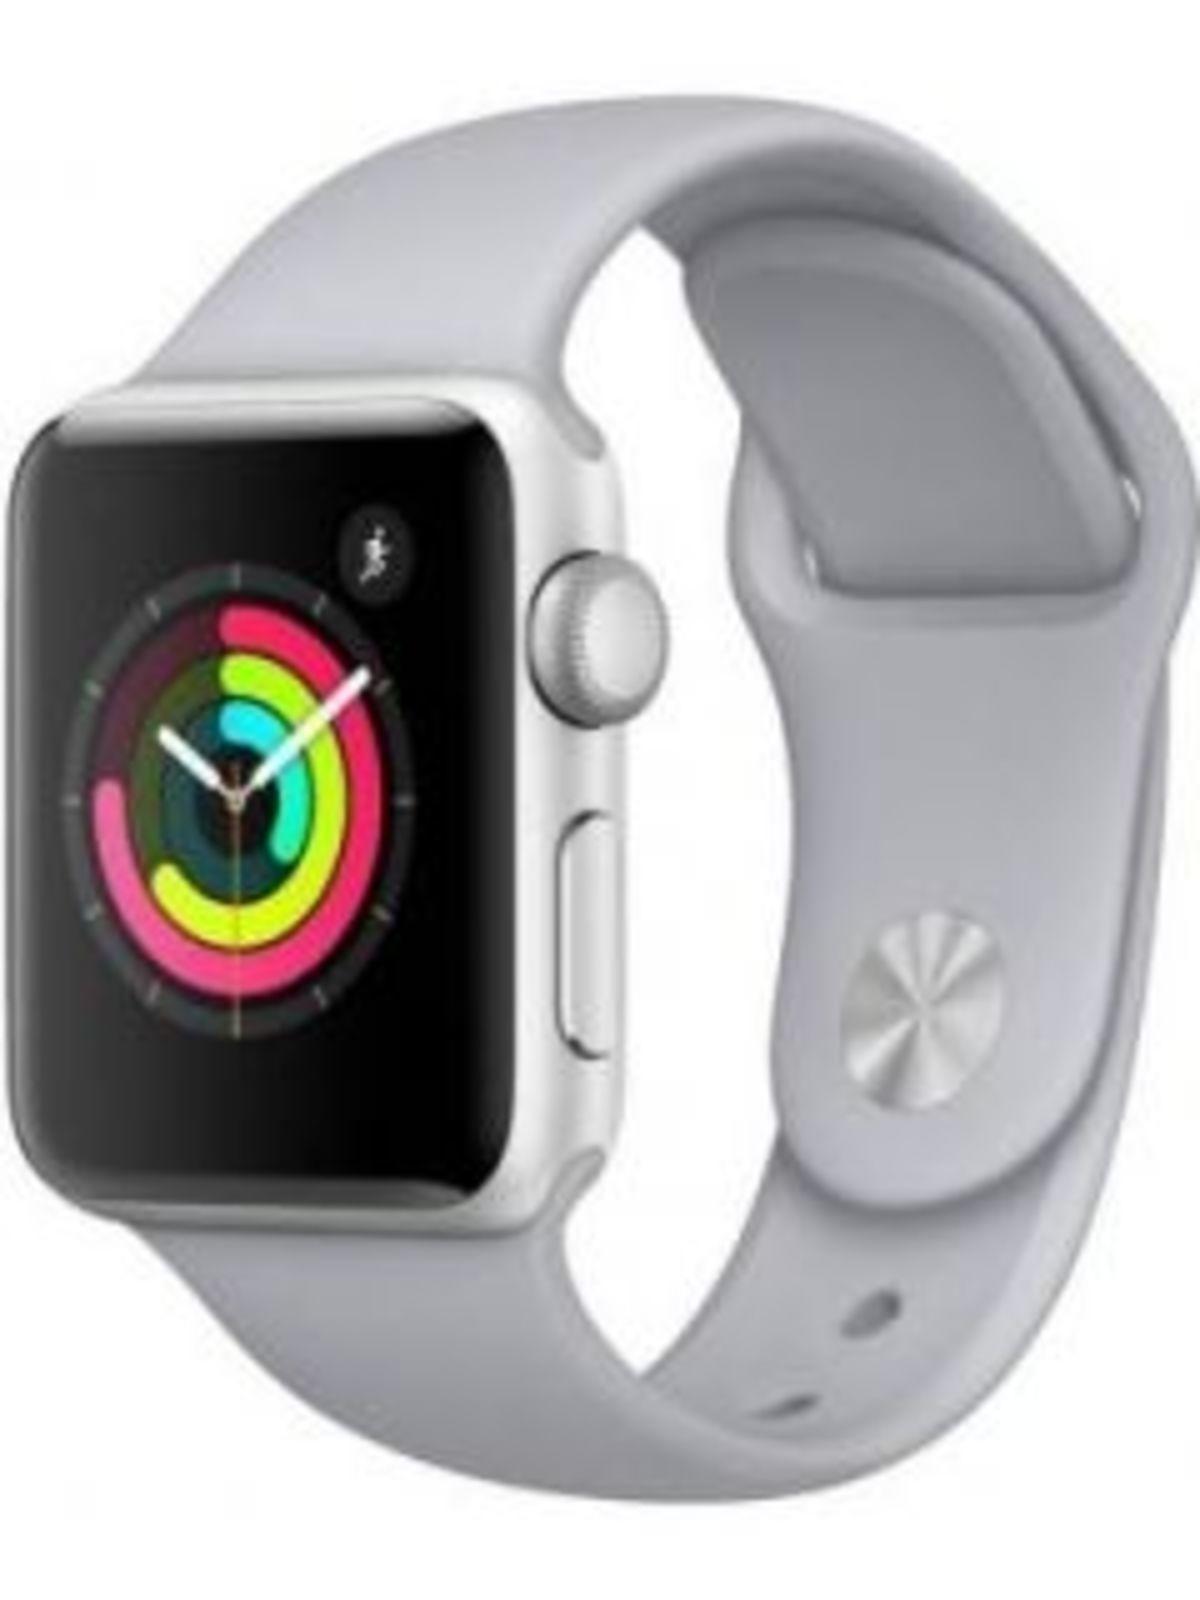 Apple Watch Series 3 42mm Price in India, Full Specifications 